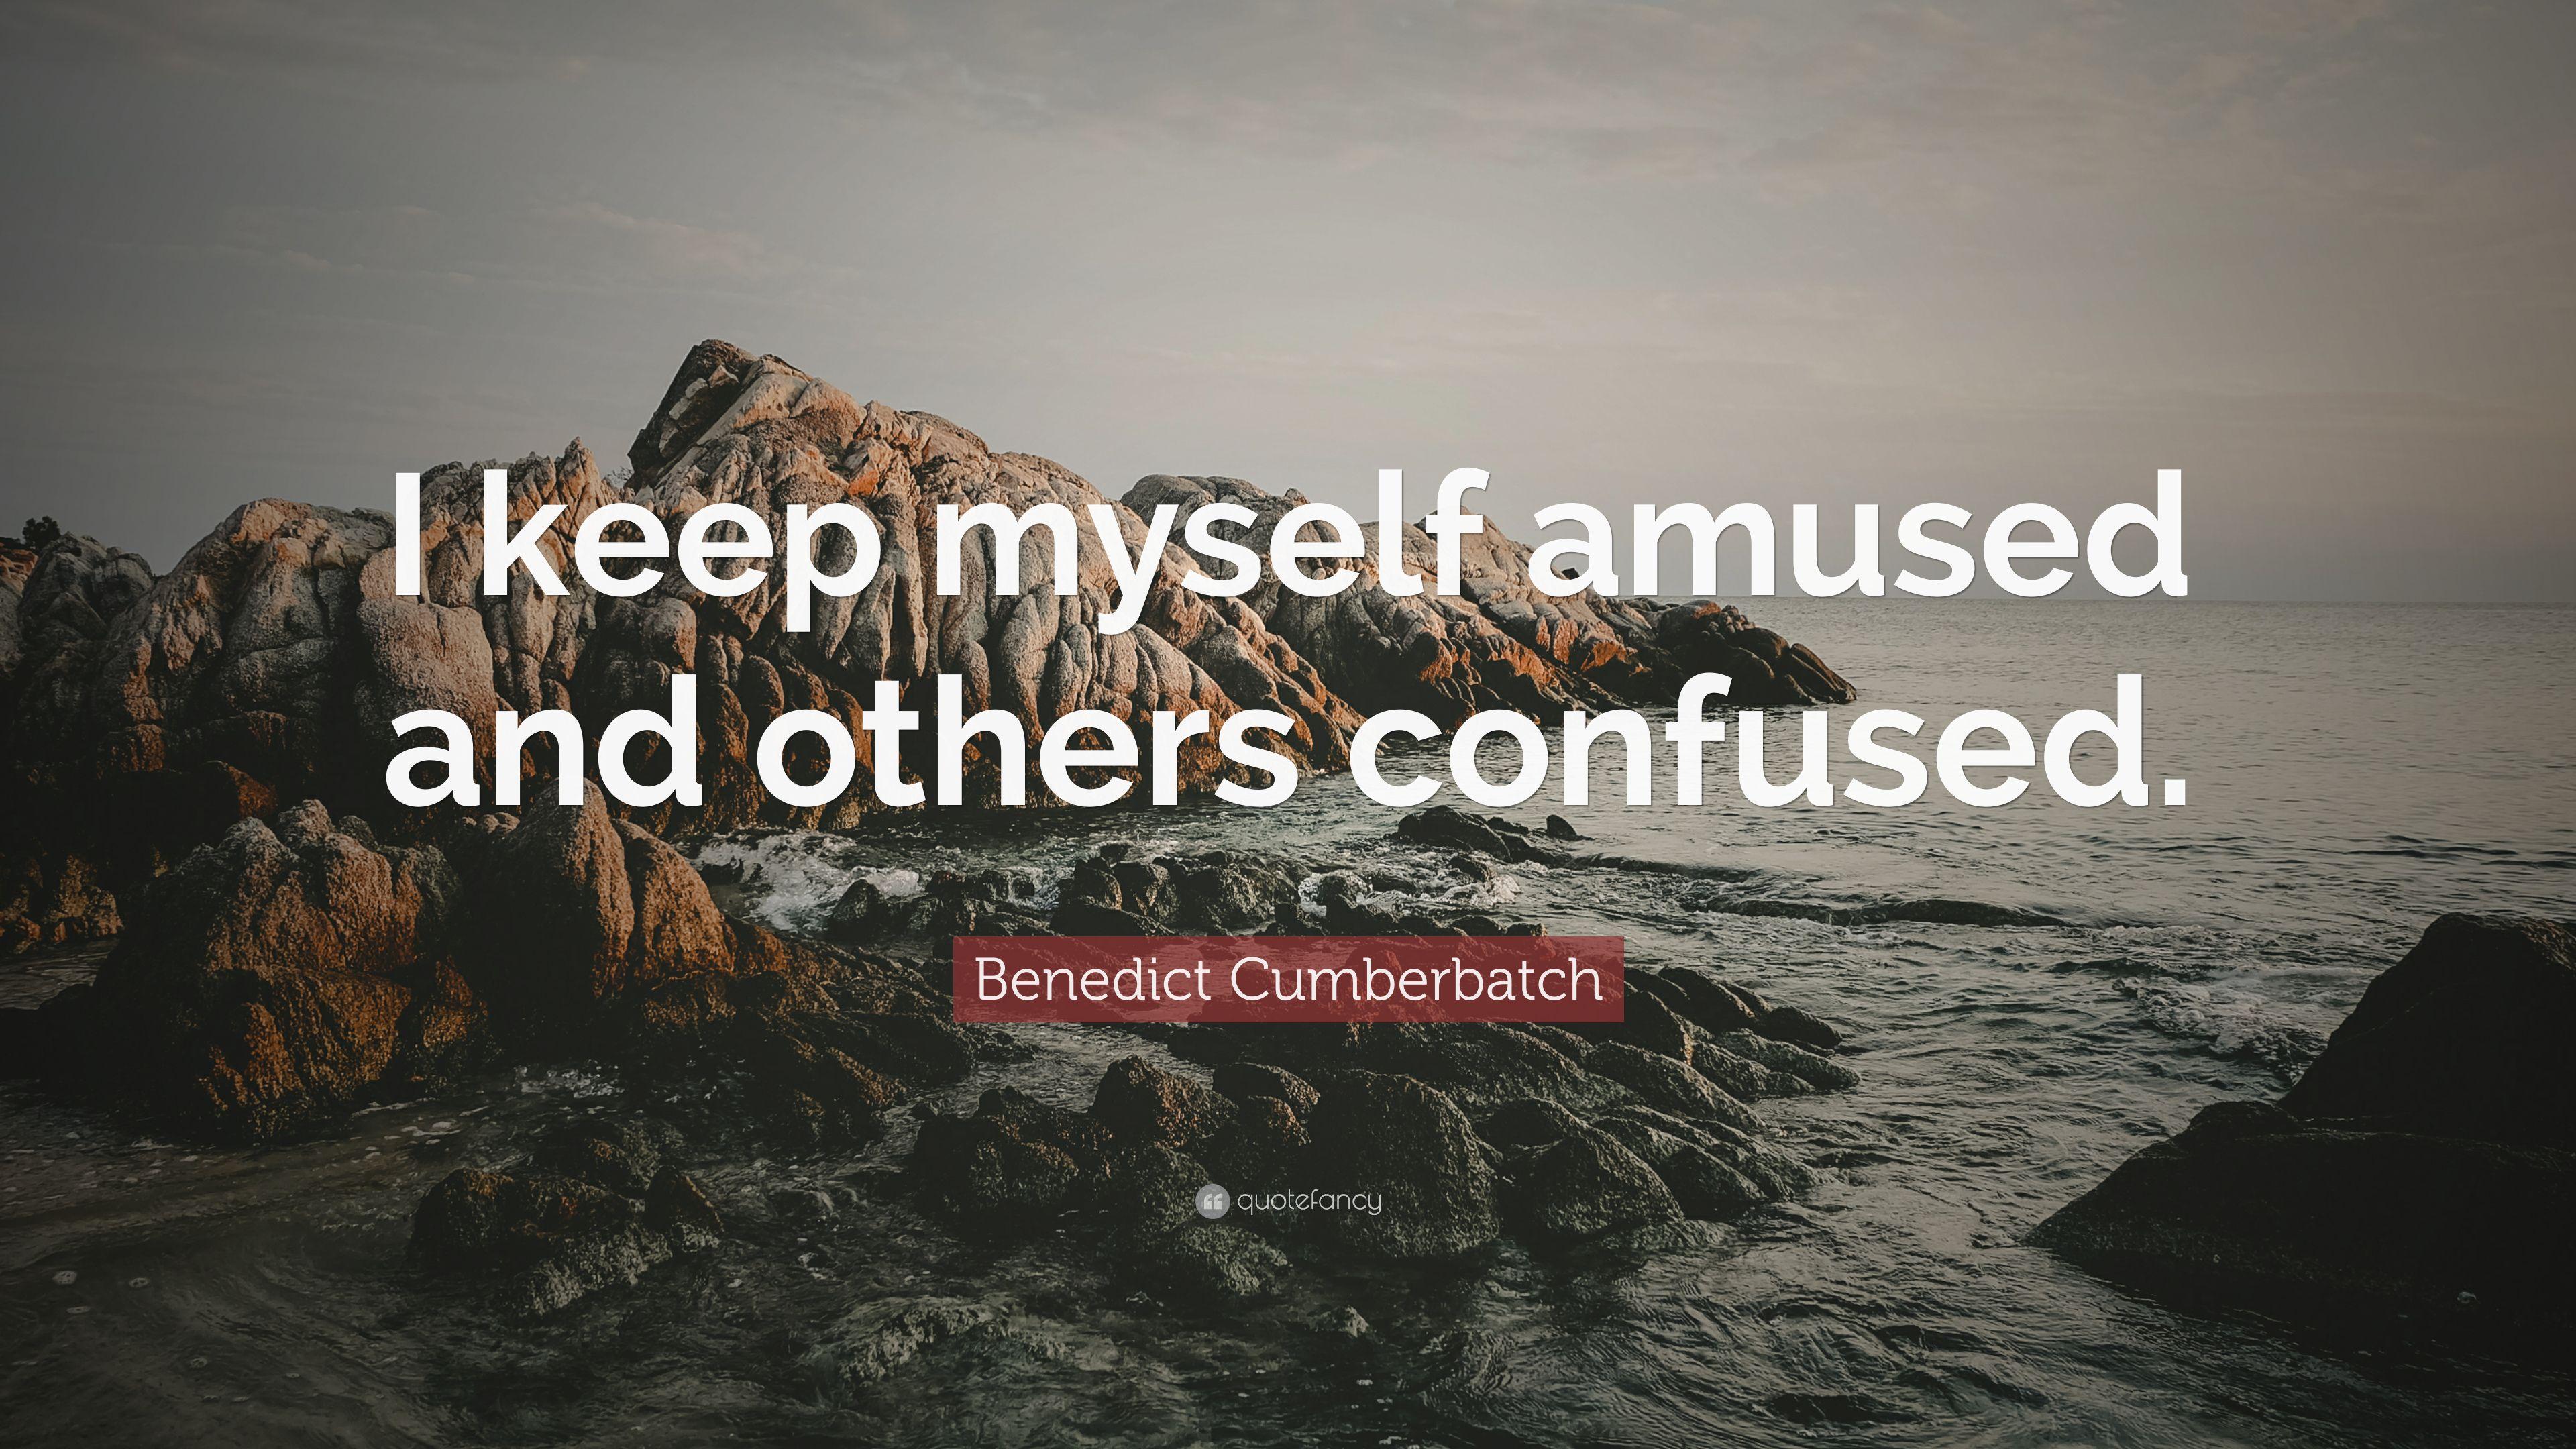 Benedict Cumberbatch Quote: “I keep myself amused and others